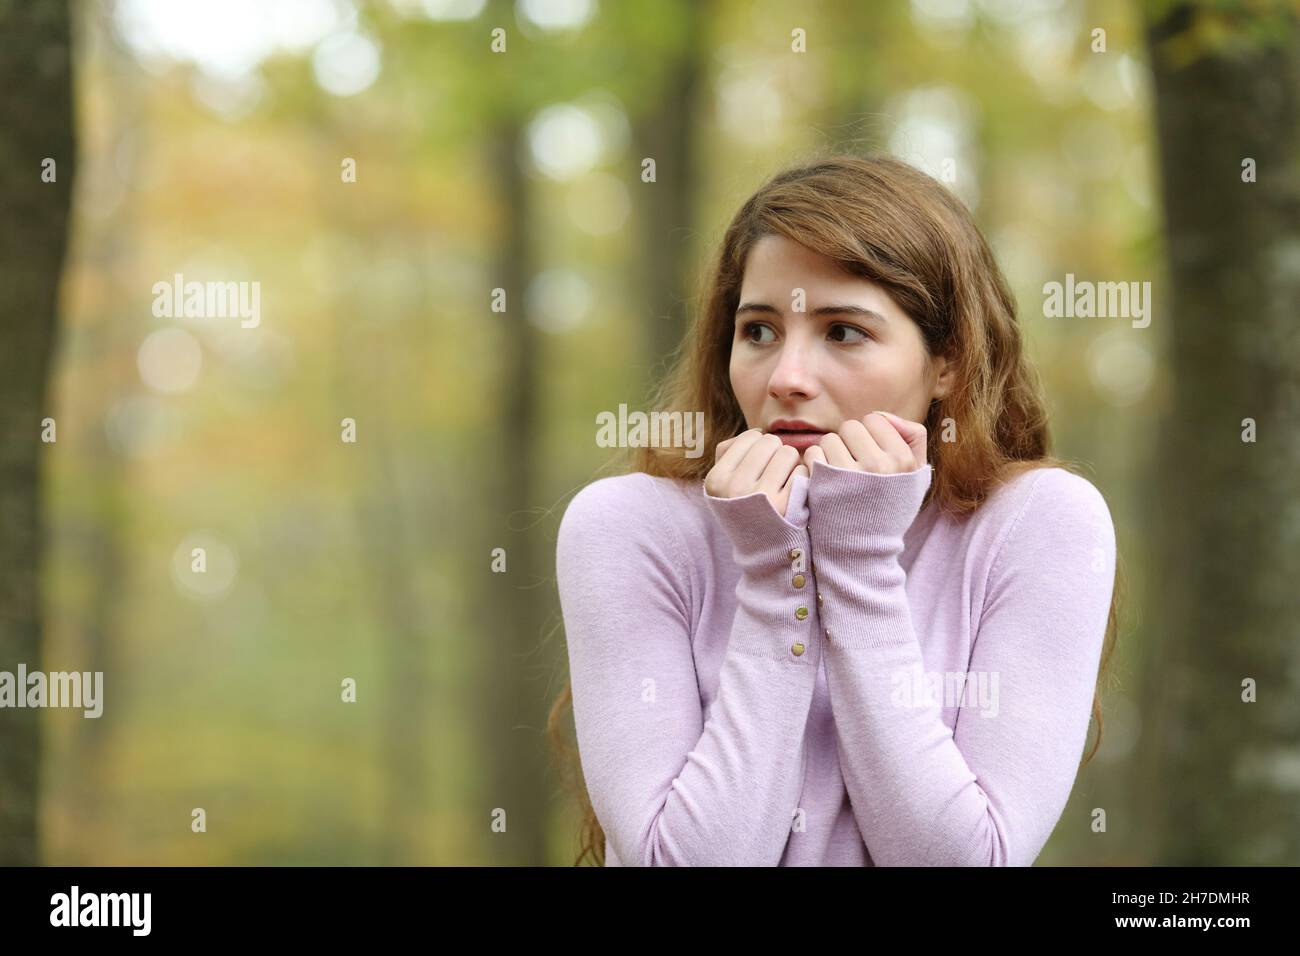 Scared woman looking at side walking alone in a park Stock Photo